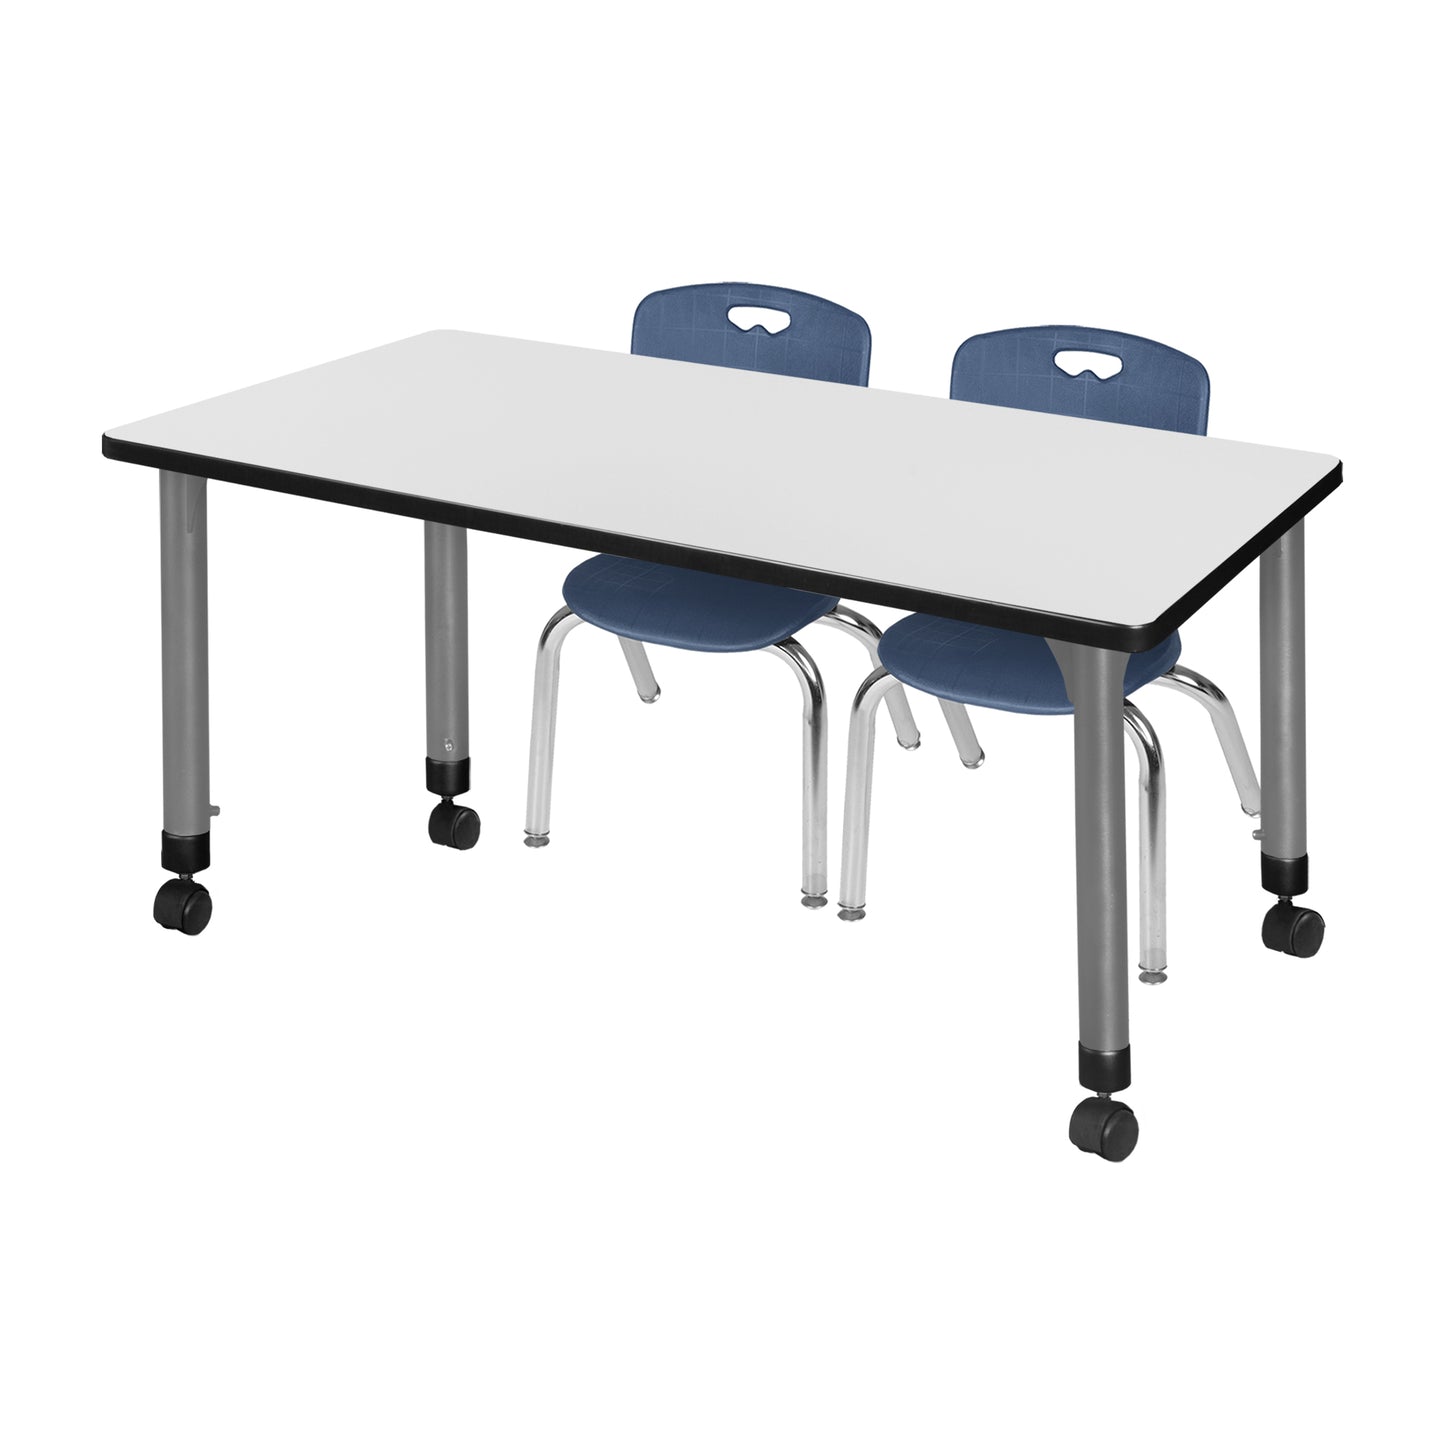 Regency Kee 60 x 24 in. Adjustable Classroom Table- White & 2 Andy 12 in. Stack Chairs